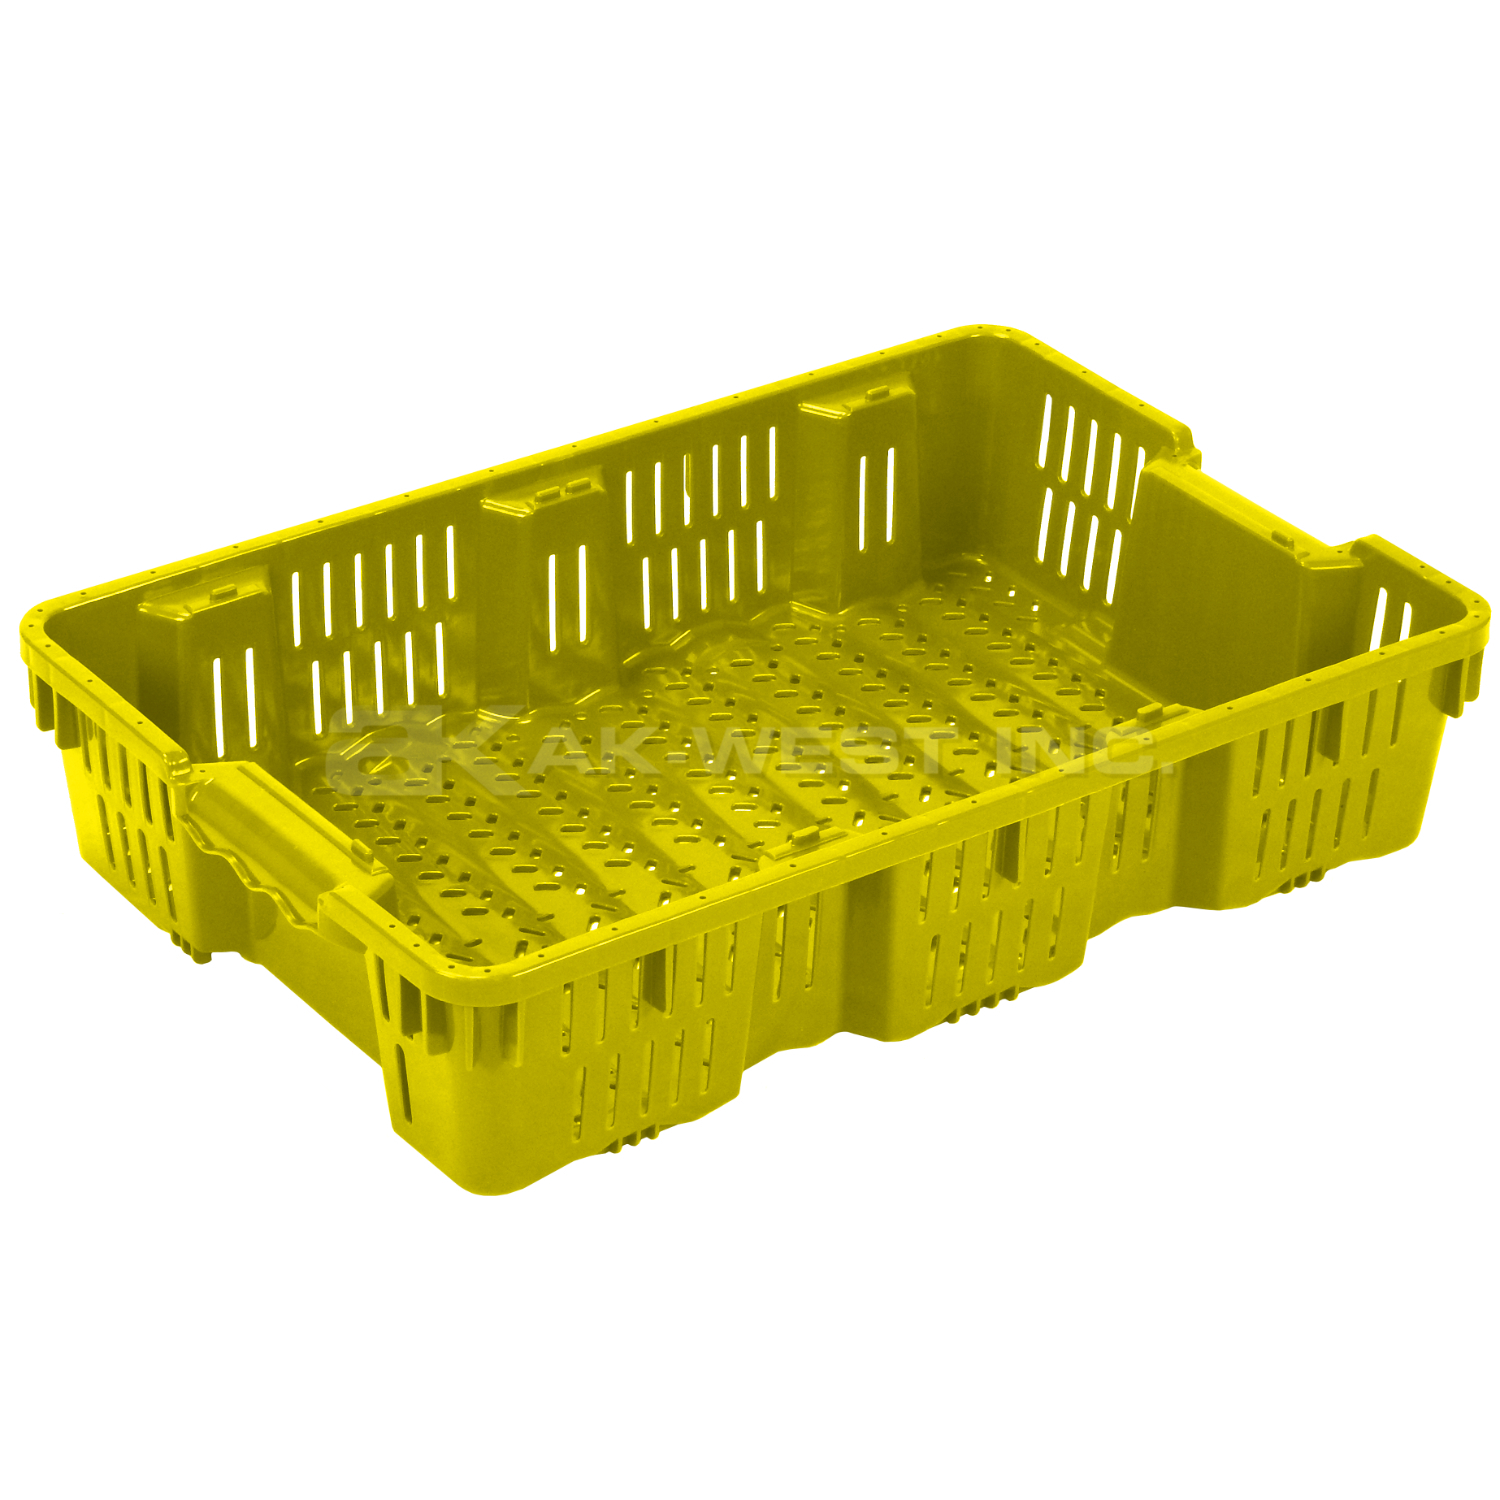 Yellow, 24"L x 16"W x 5"H Wavy Stack and Nest Container w/ Vented Sides and Base